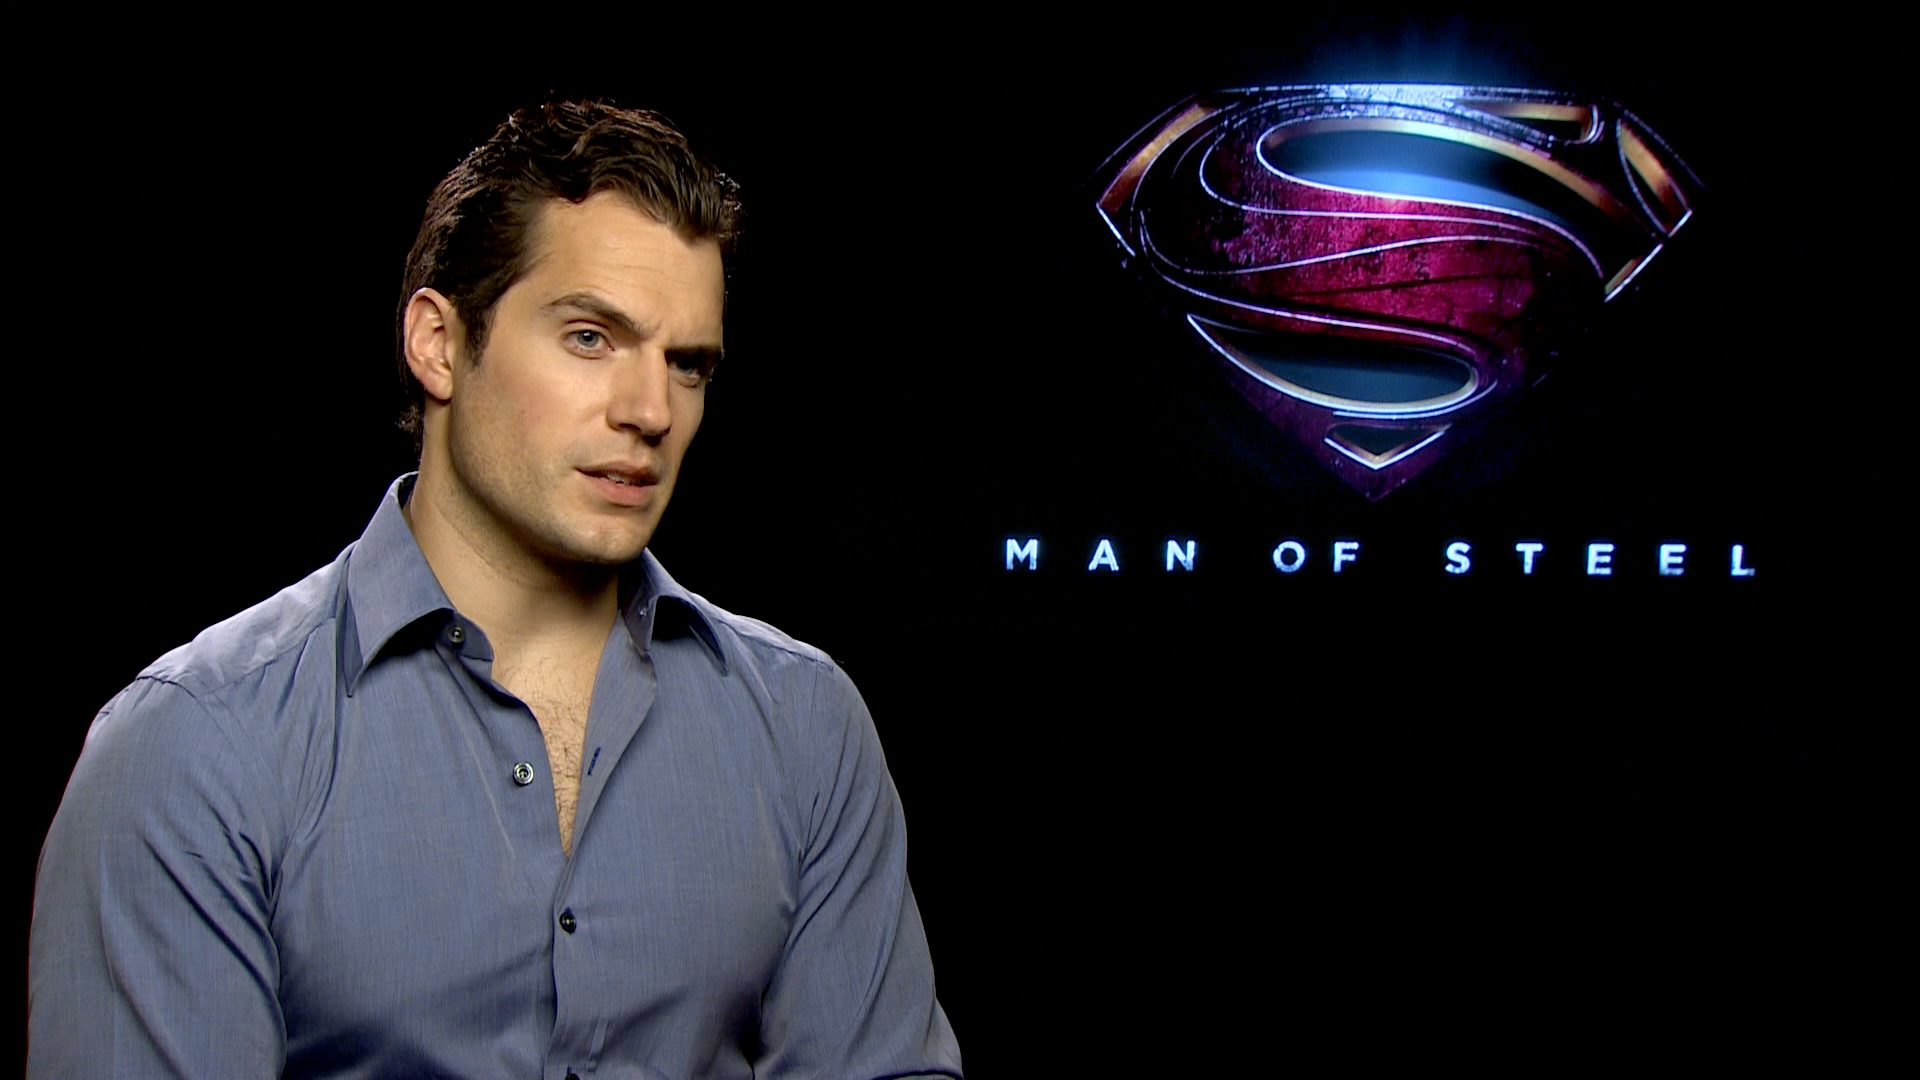 Henry Cavill Was Once Accused Of Dating The Big Bang Theory Star